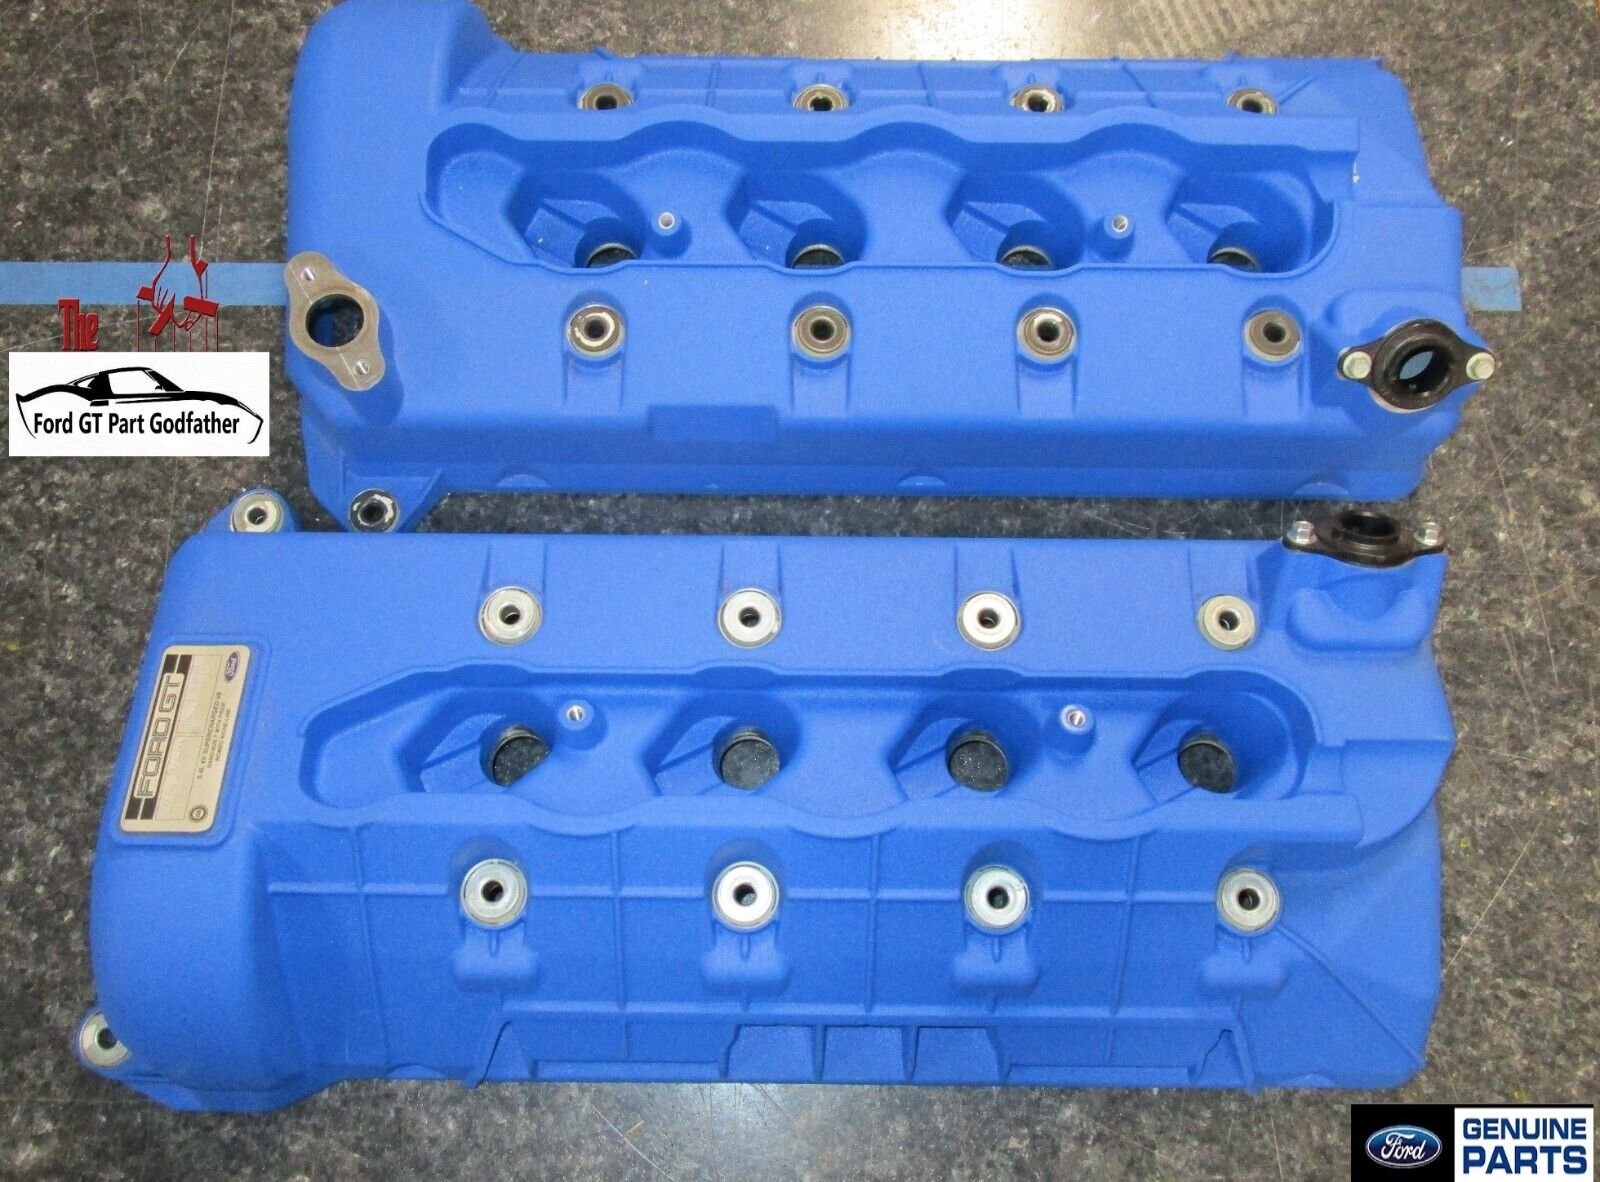 2005,2006 FORD GT GT40 SUPERCAR FACTORY OEM VALVE COVERS & SIGNATURE PLATE 05/06